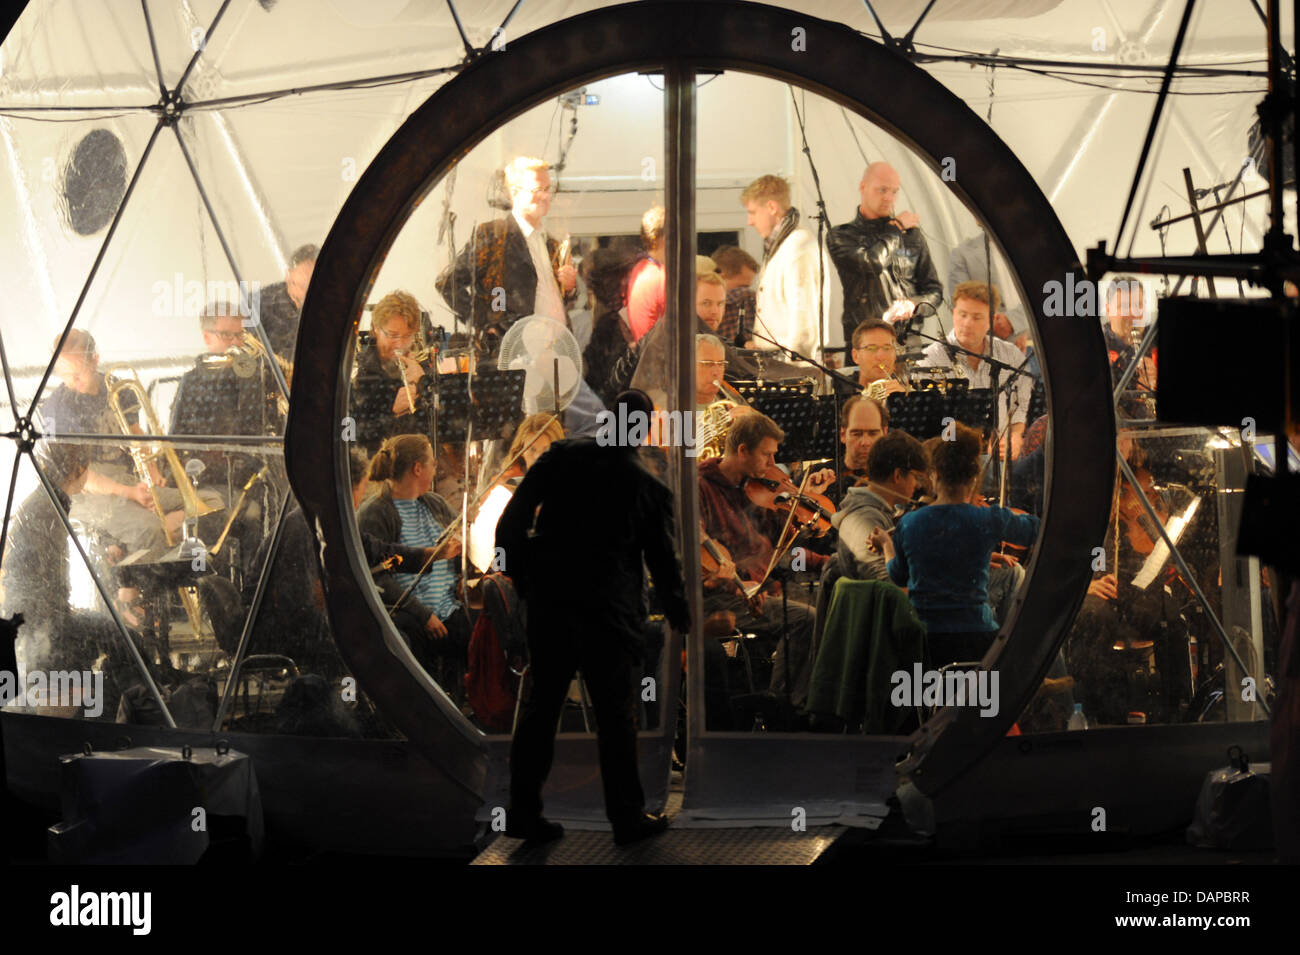 The orchestra performs in a transparent tent during the opera 'Magic Flute' by Wolfgang Amadeus Mozart at the sea festival Berlin at the sea stage of the lido Wannsee in Berlin, Germany, 09 August 2011. The opera will be staged from 11 to 28 August 2011. Photo: Jens Kalaene Stock Photo